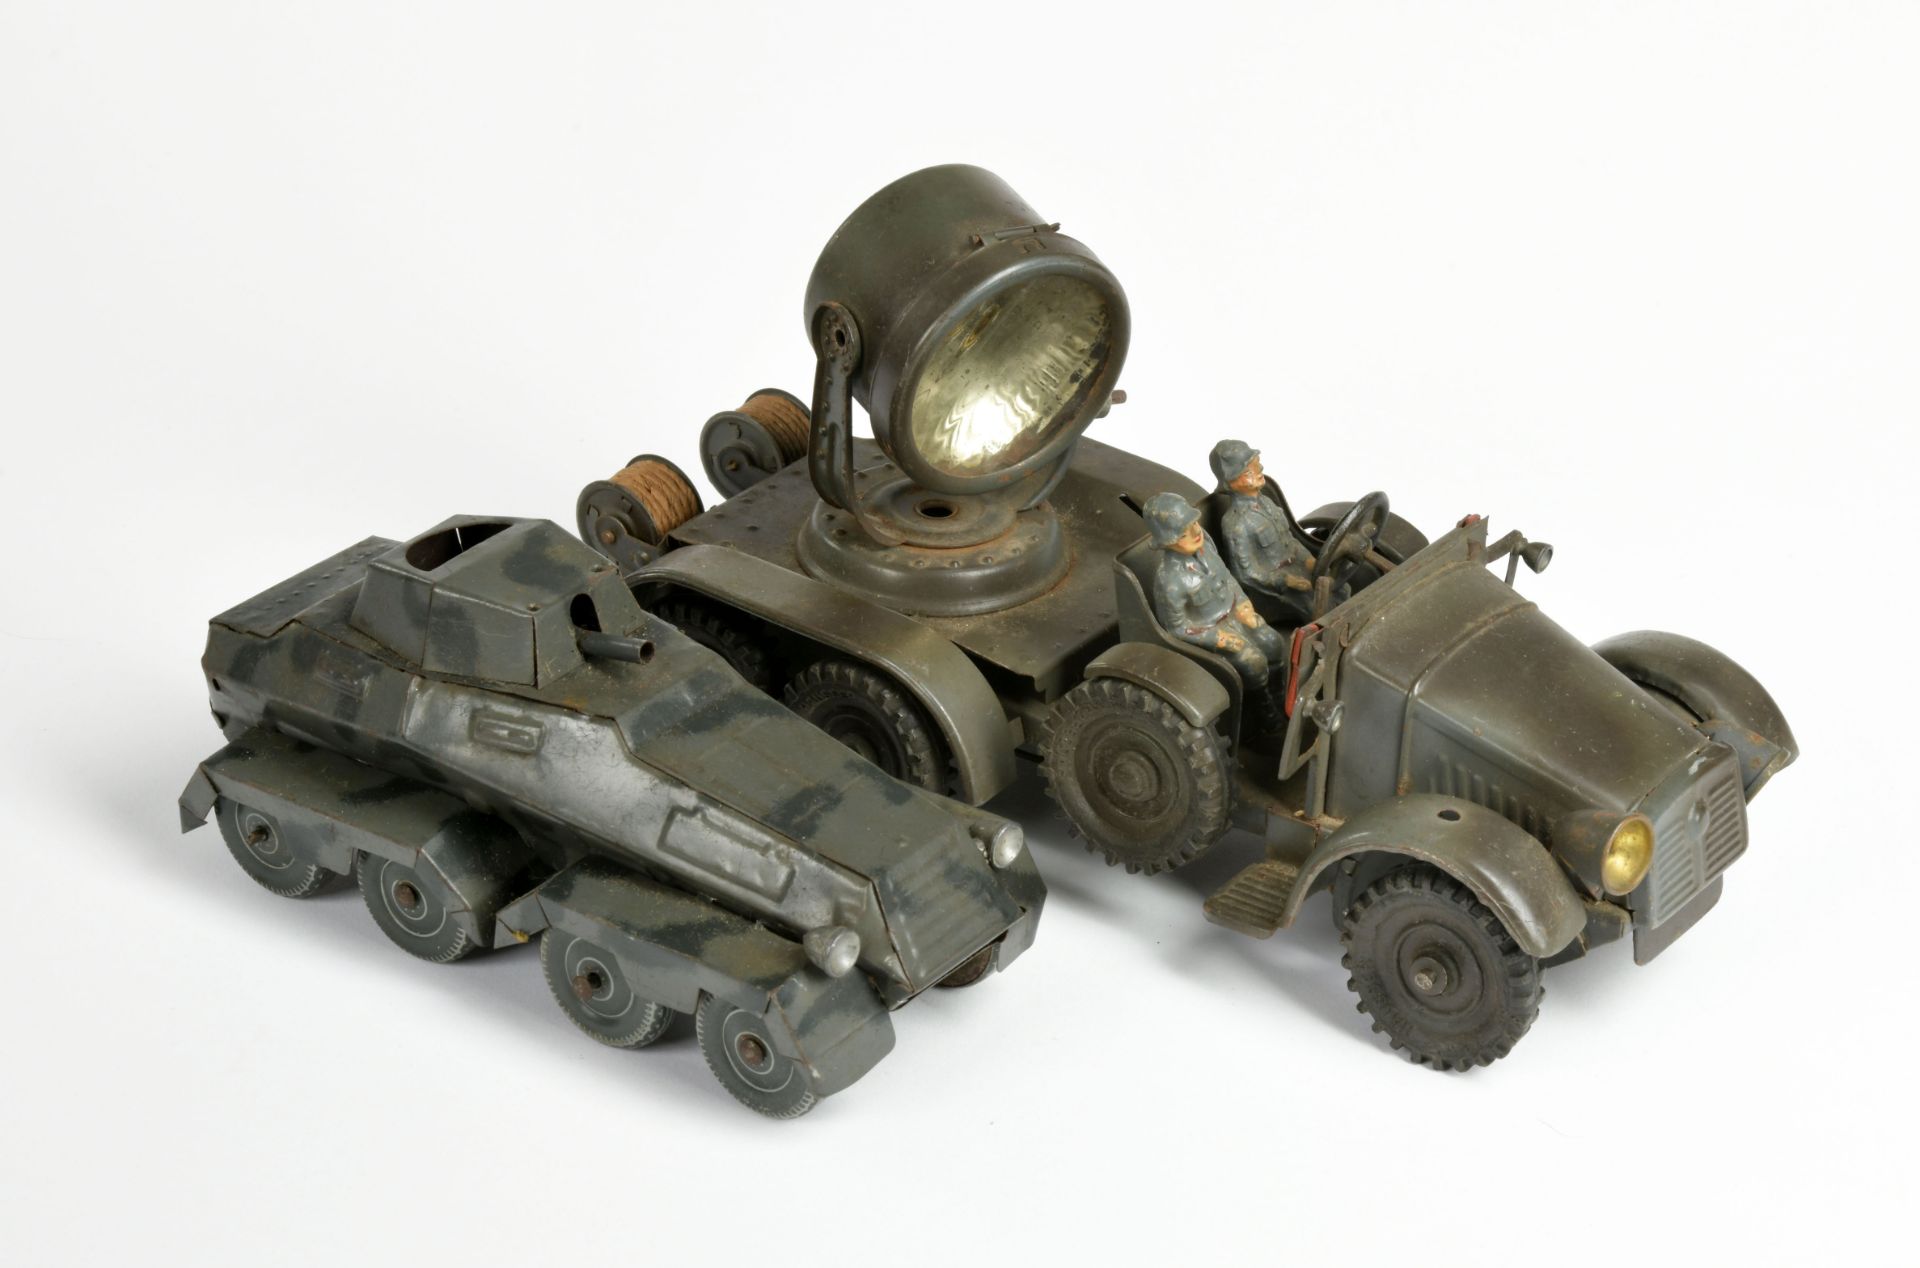 Hausser, search light truck + Tippco tank car, Germany pw, tin, 17-25cm, with defects, C 3